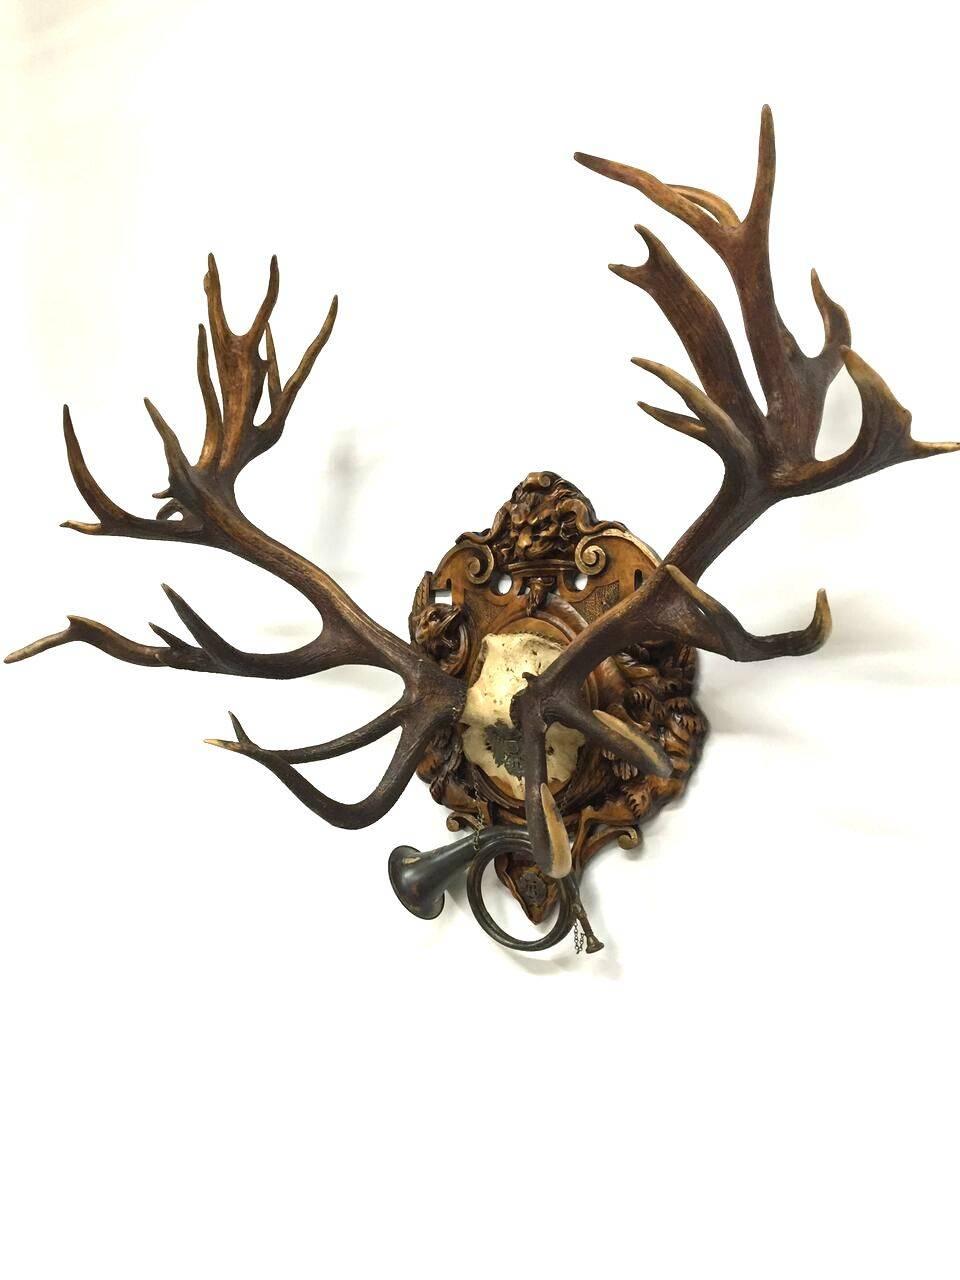 Historic red stag trophy taken during Kaiser Wilhelm II of Germany's Eulenburg hunt of 1892 in Liebenburg, Germany and decorated with an original officer's wappen from the officer's pickelhaube or helmet and the original fürst pless hunting Horn